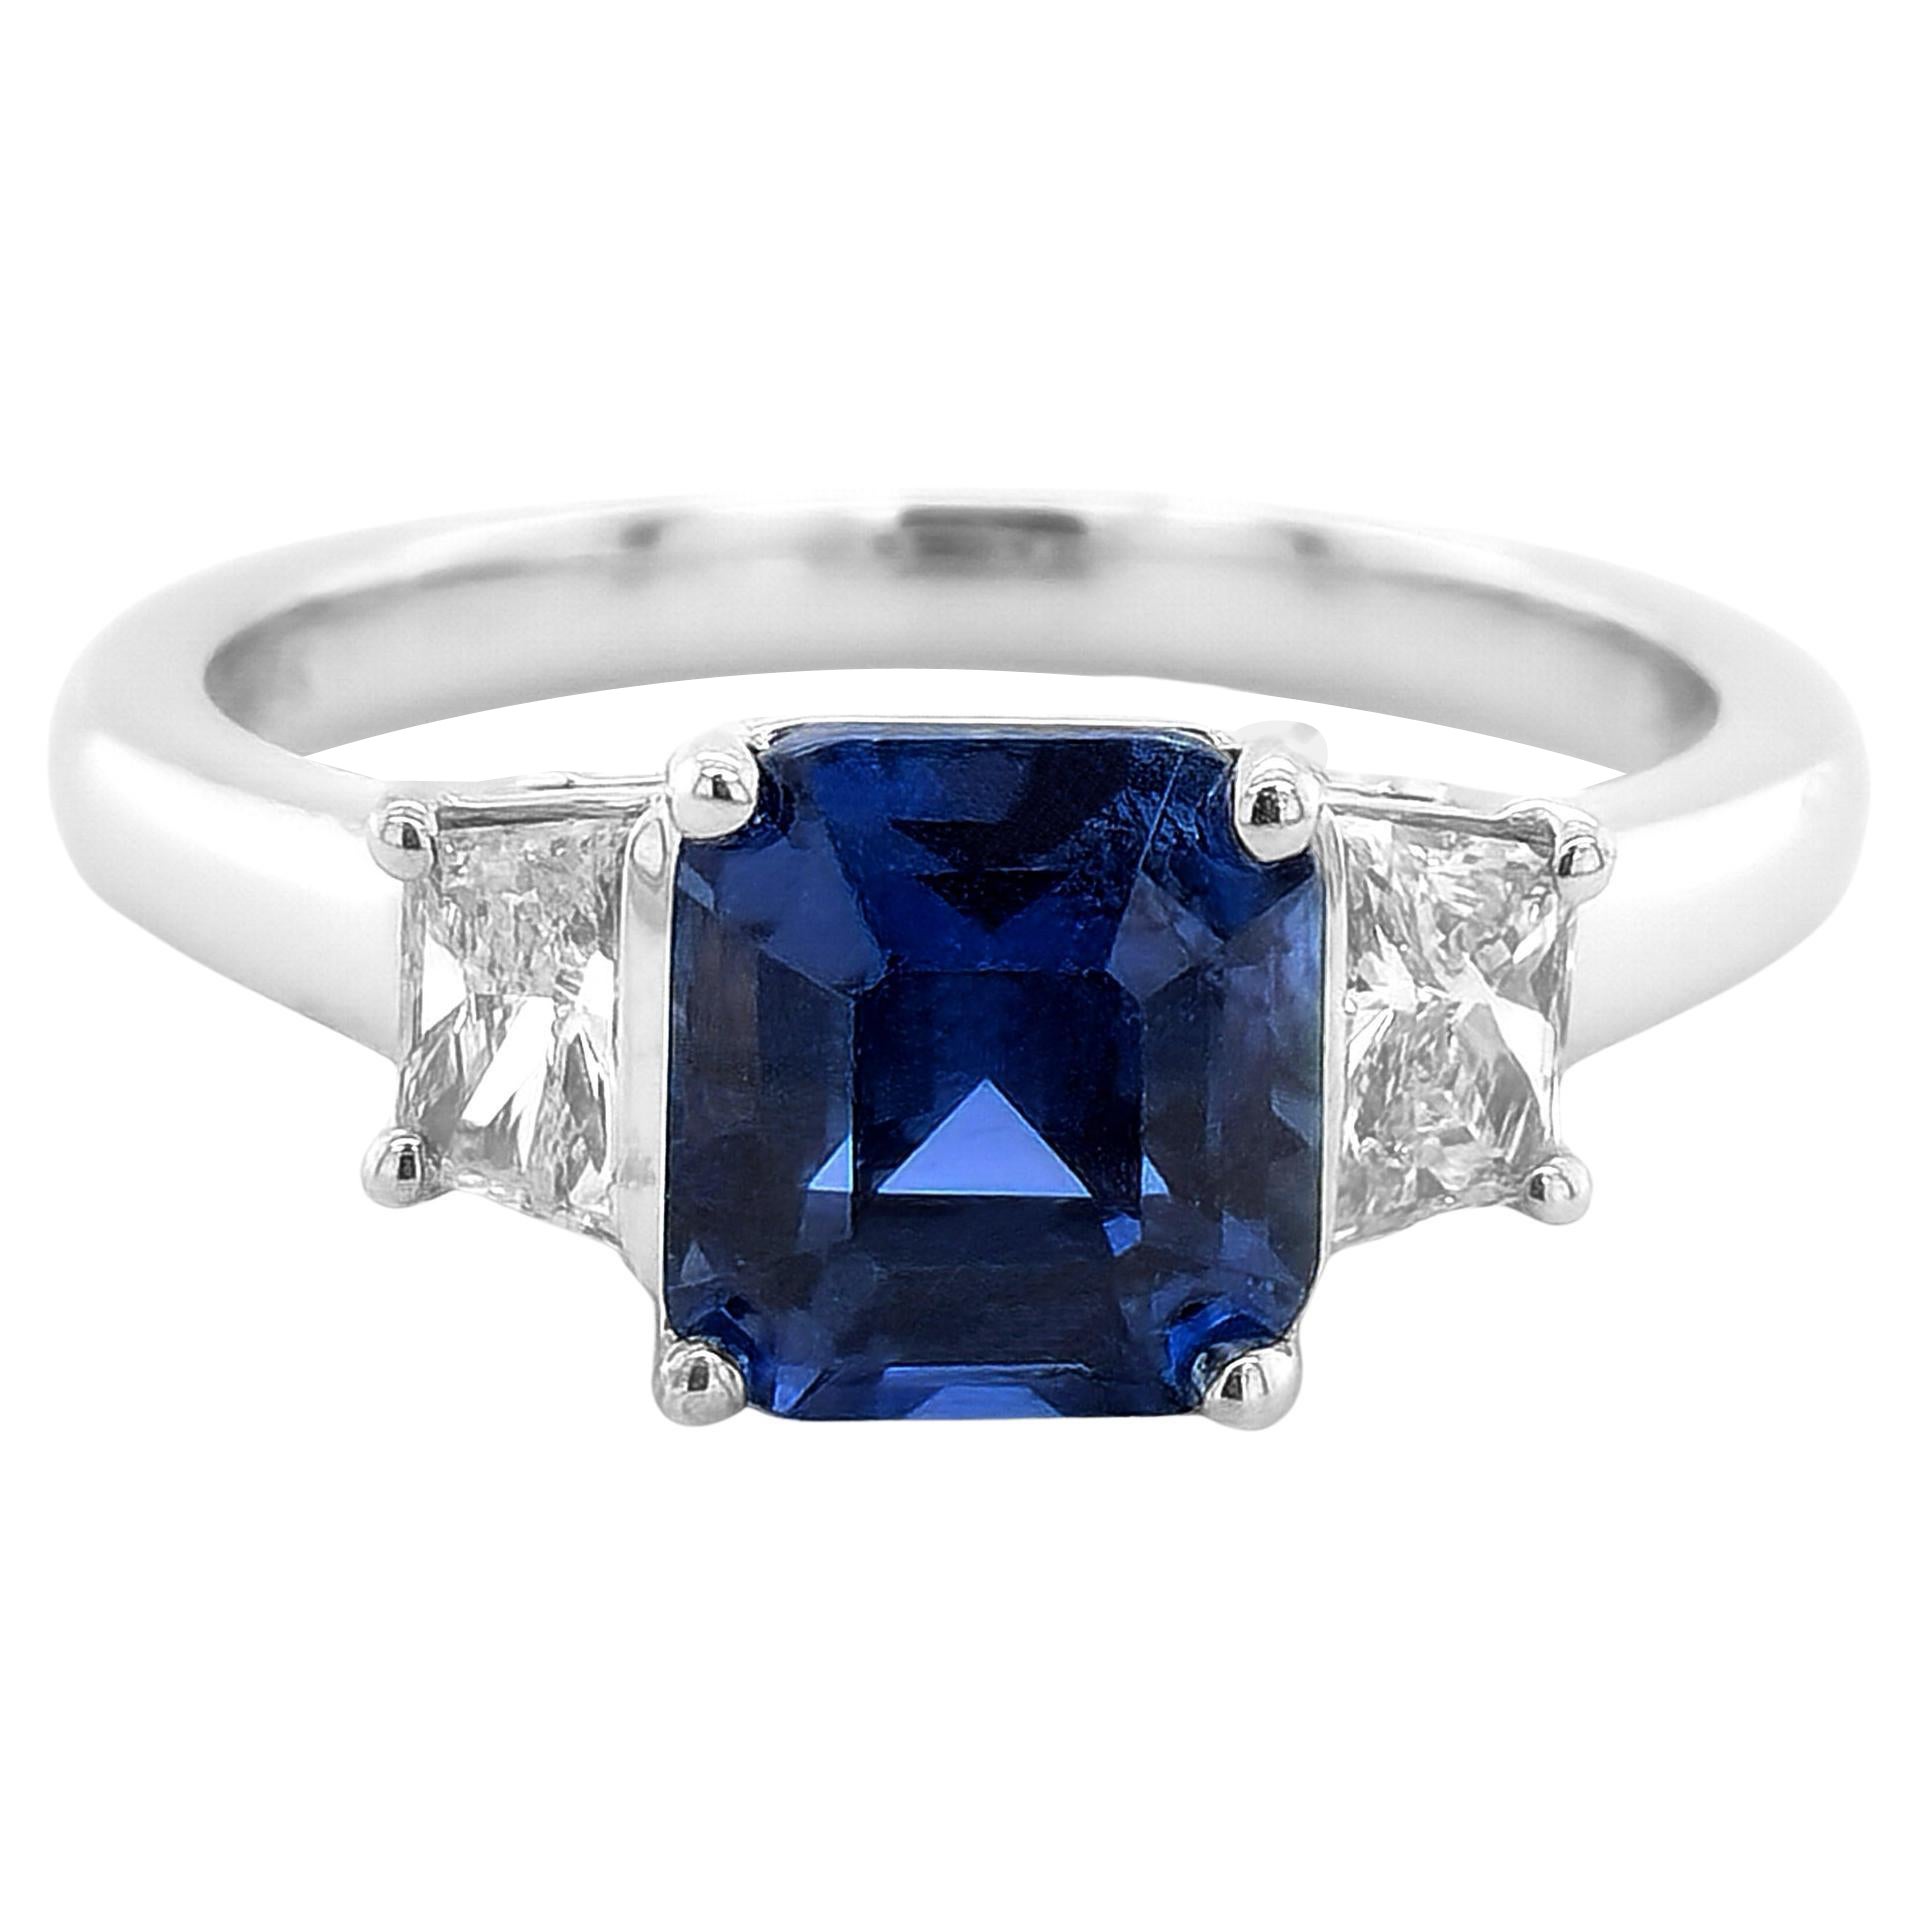 Why is cobalt spinel expensive?